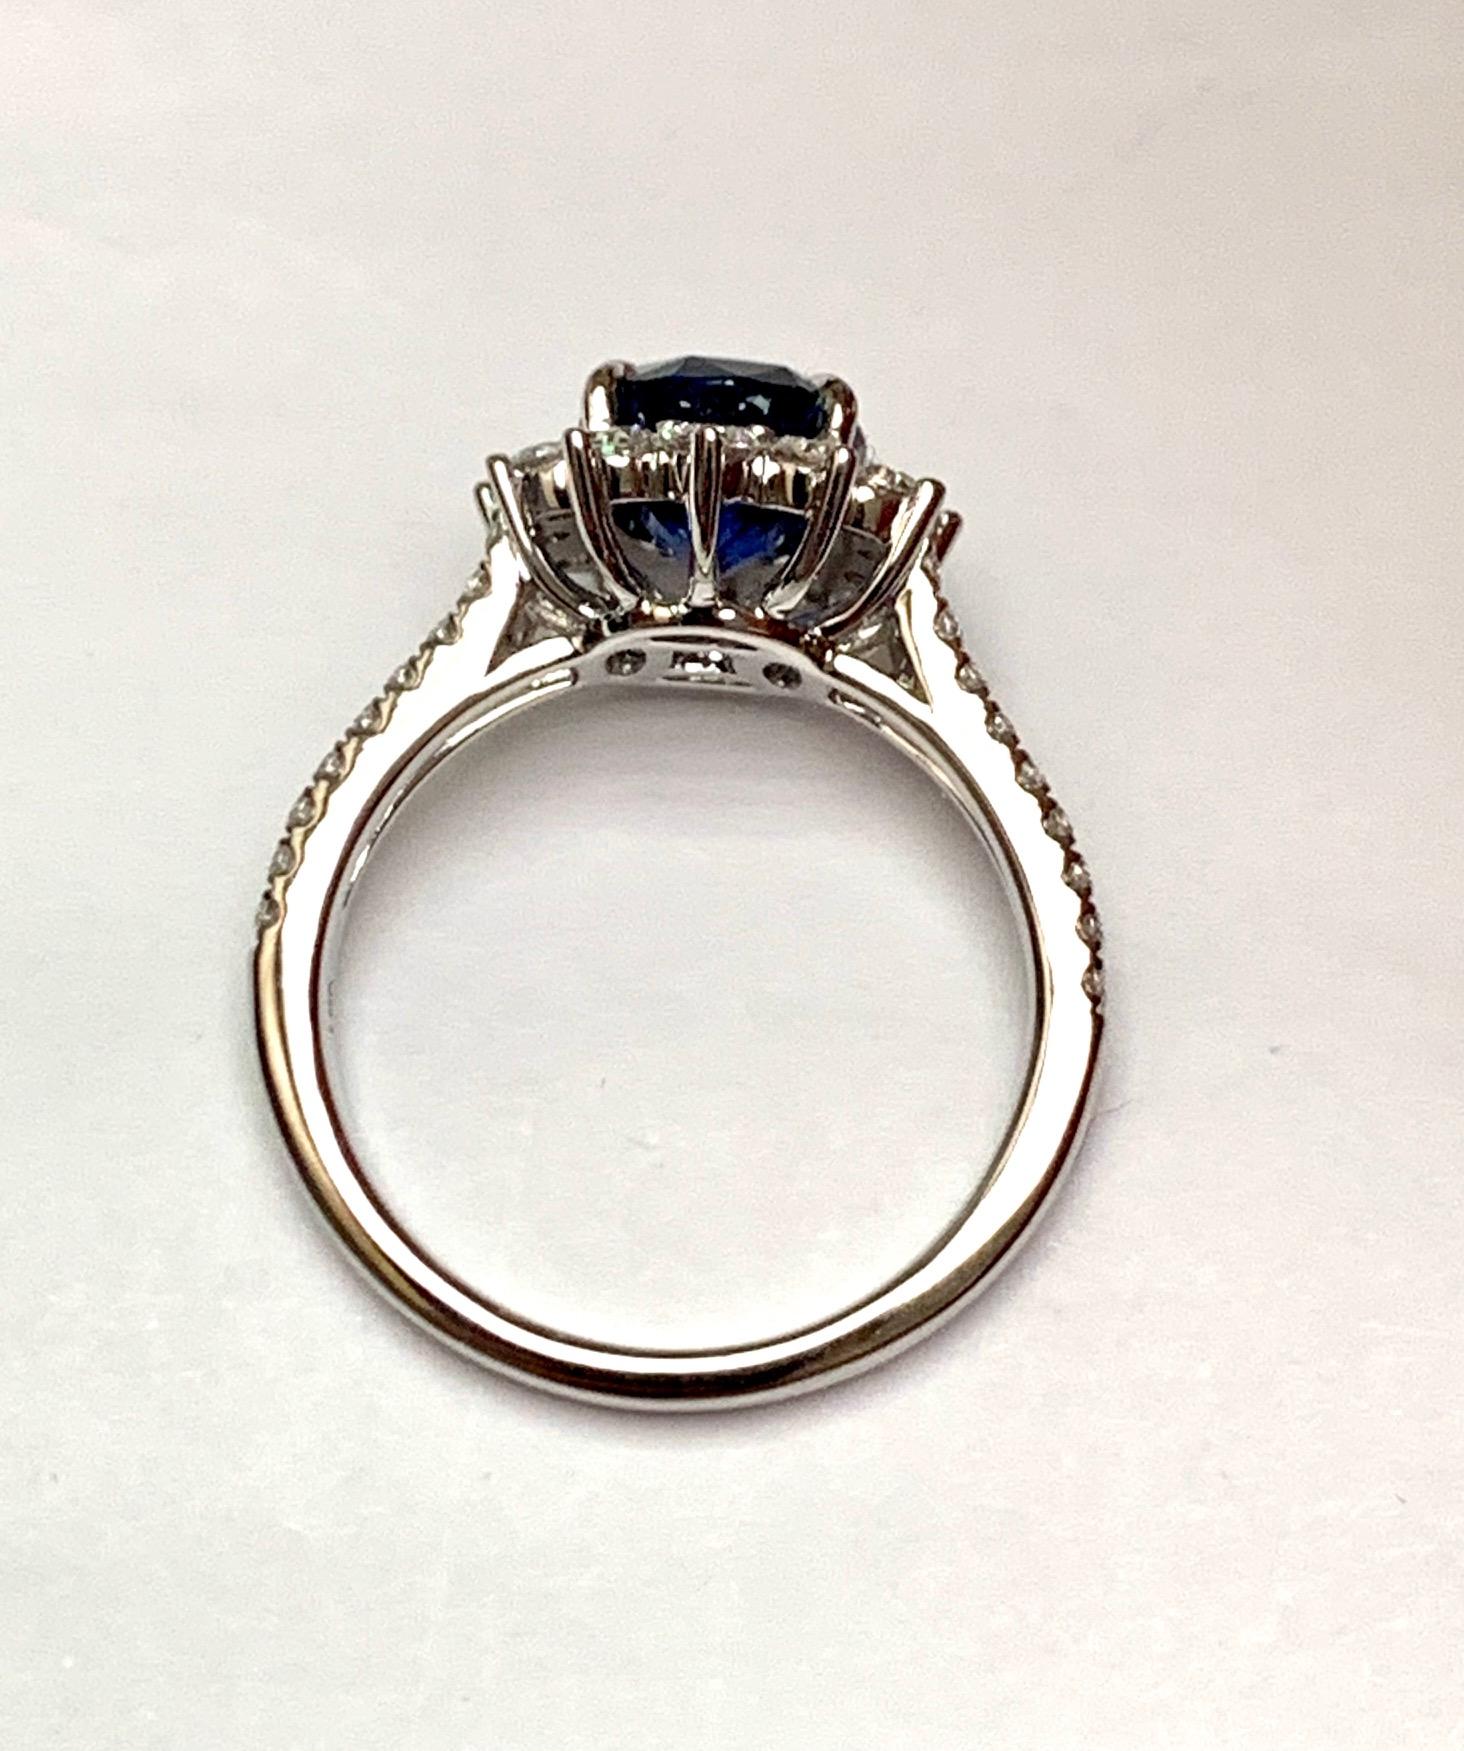 Oval Cut 2.82 Carat Sapphire Diamond Cocktail Ring For Sale